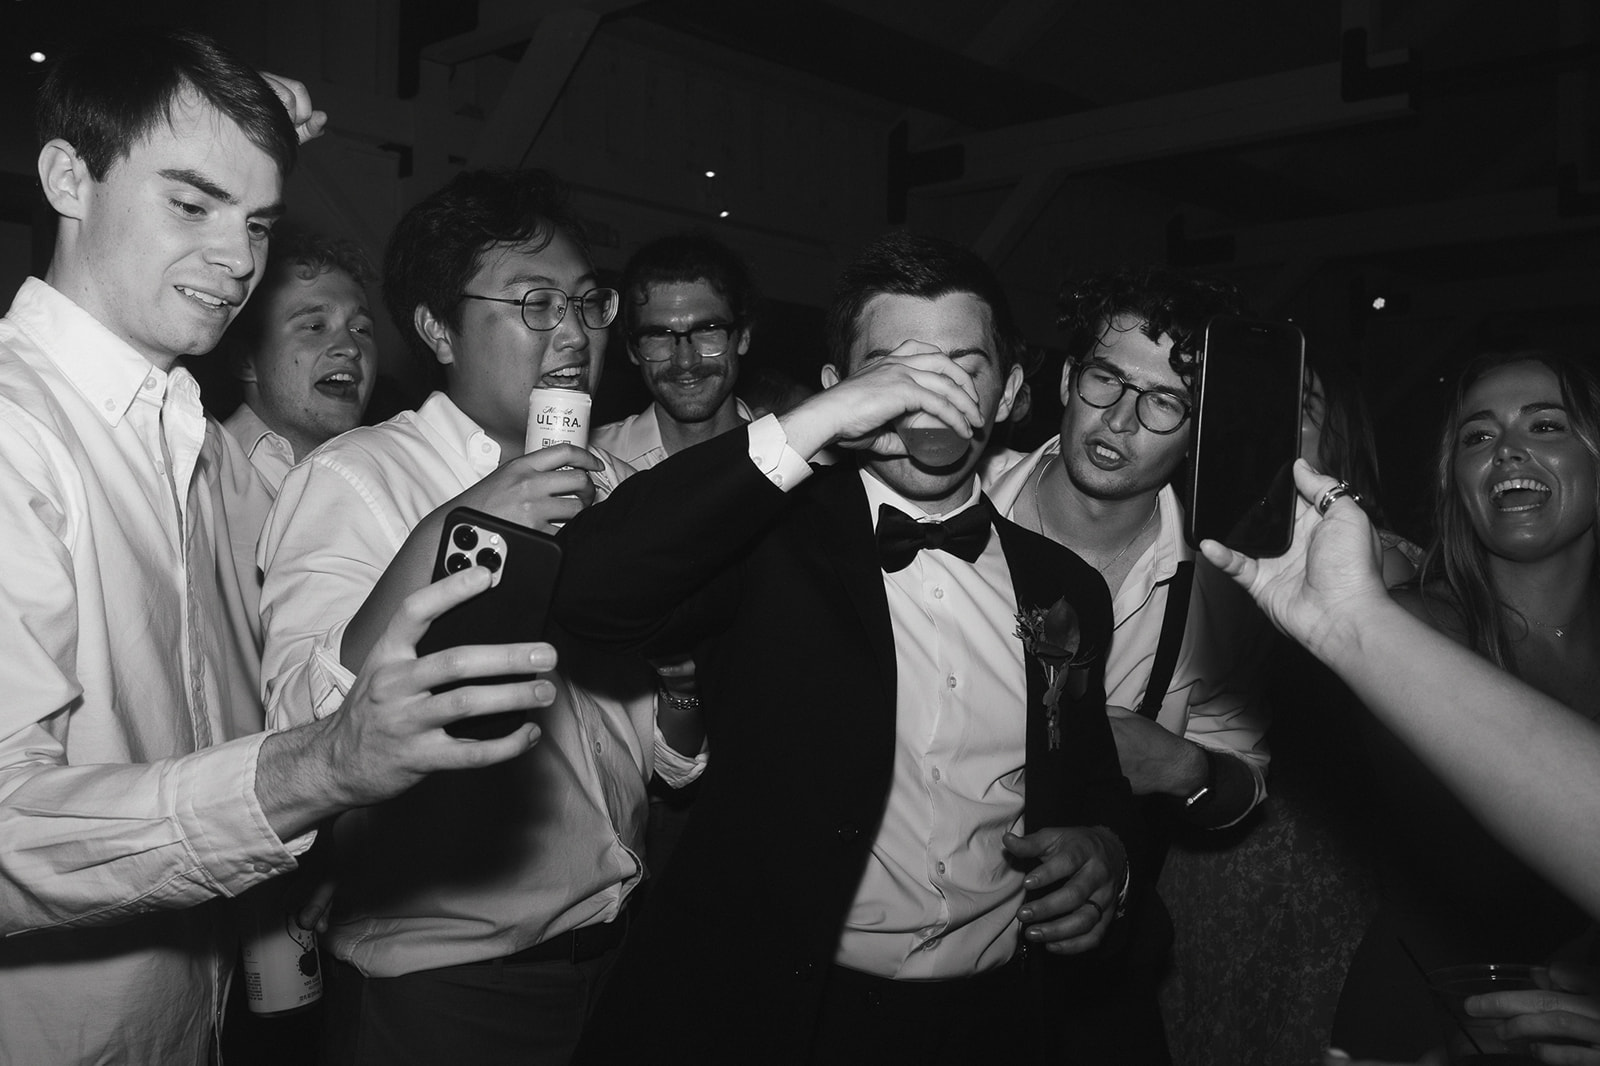 Black and white photo of a groom taking a drink during his wedding reception surrounded by groomsmen.